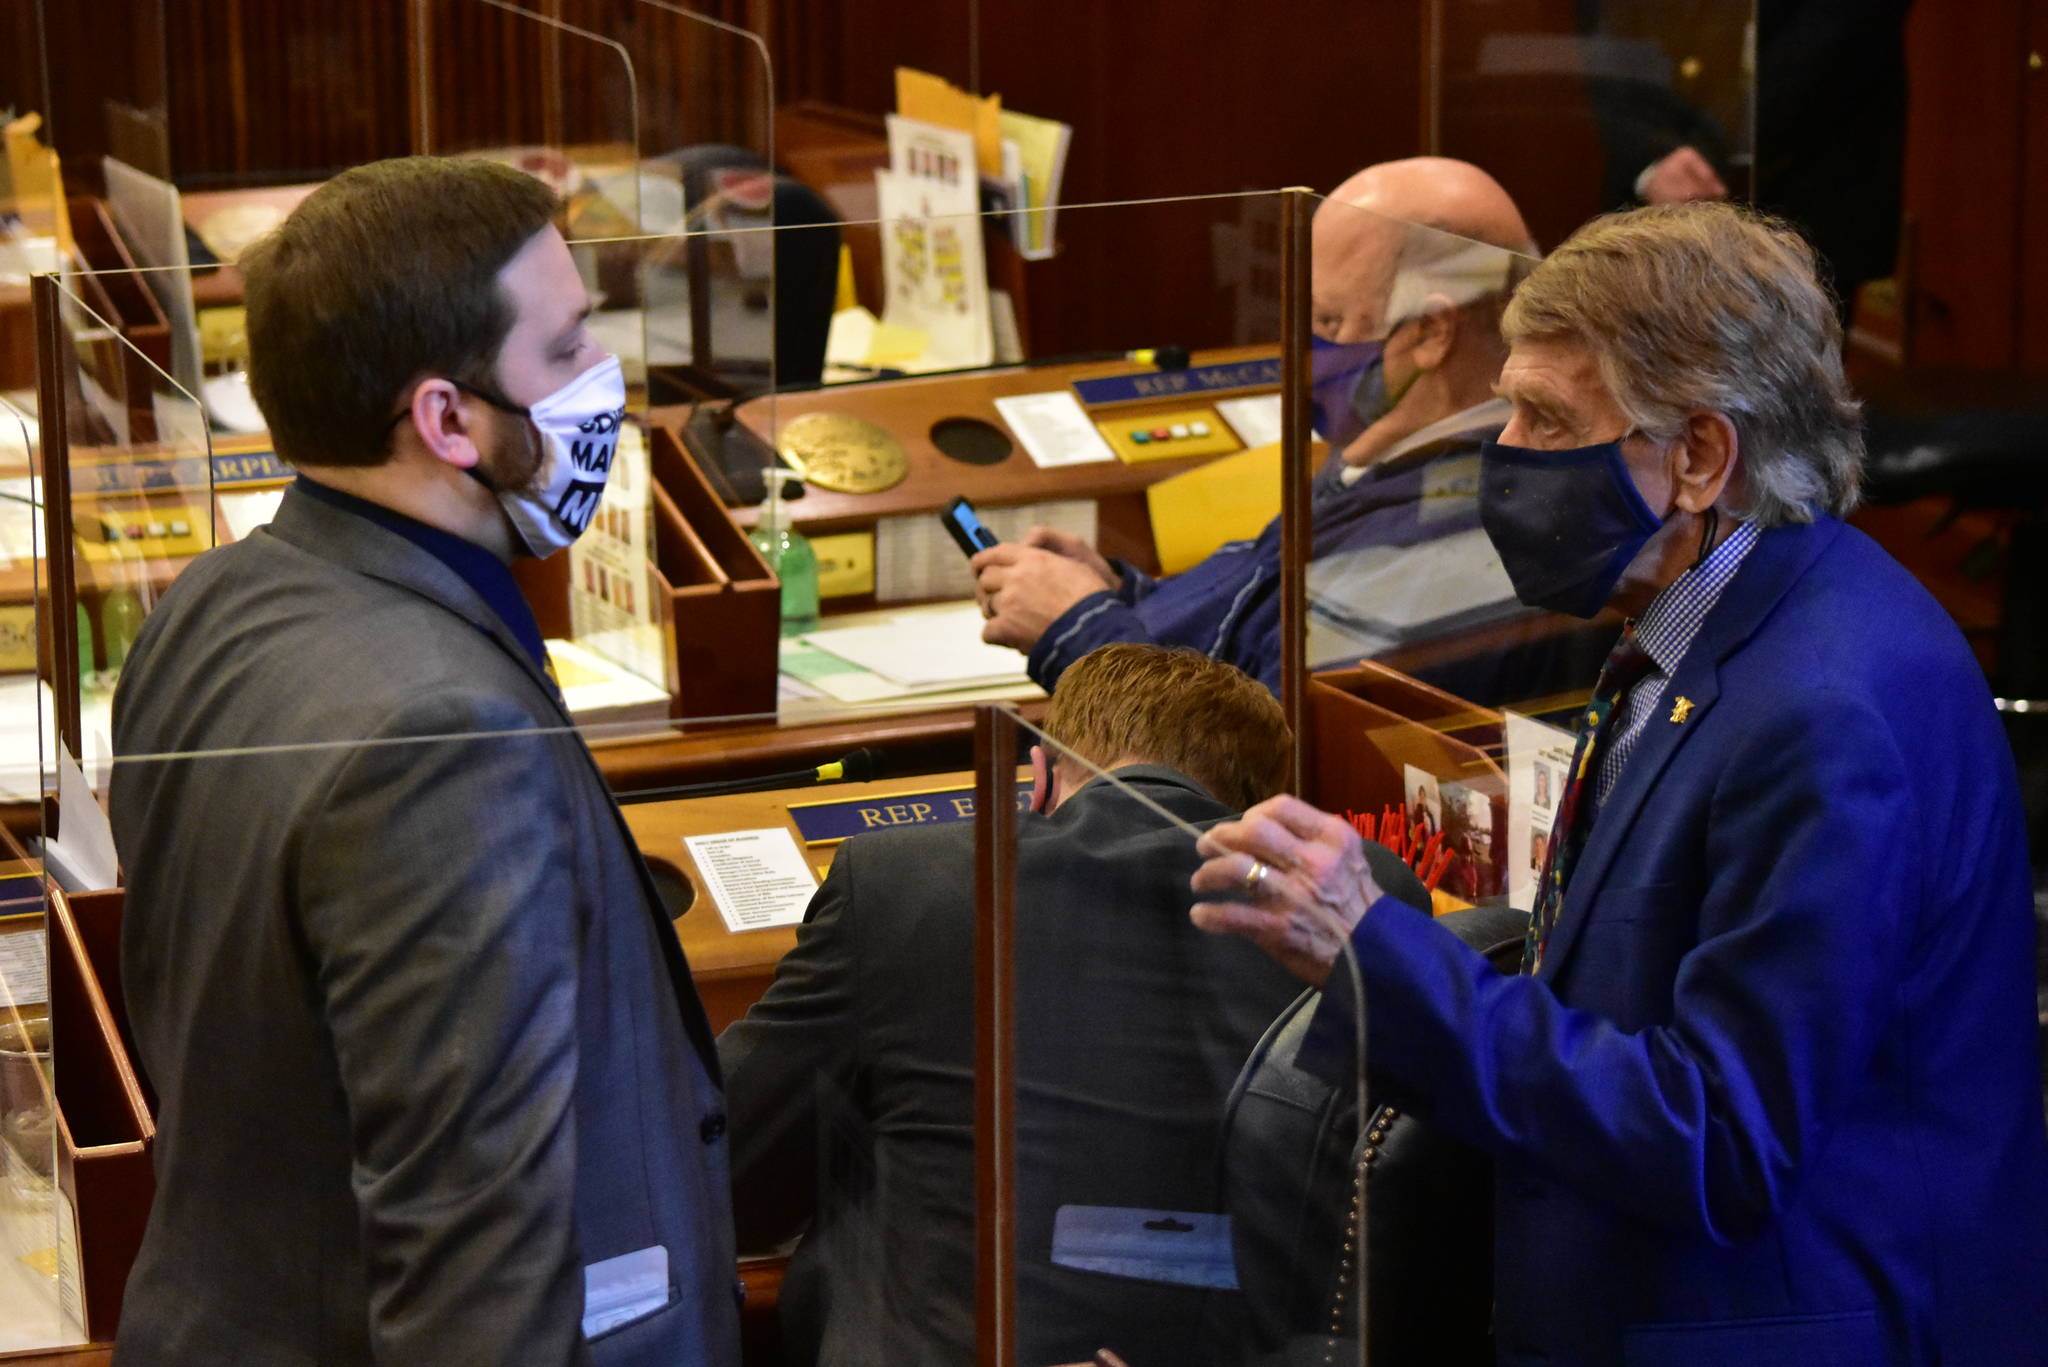 House Minority Whip Rep. Laddie Shaw, R-Anchorage, speaks to Rep. Chris Kurka, R-Wasilla on Friday, March 19, 2021. (Peter Segall / Juneau Empire)